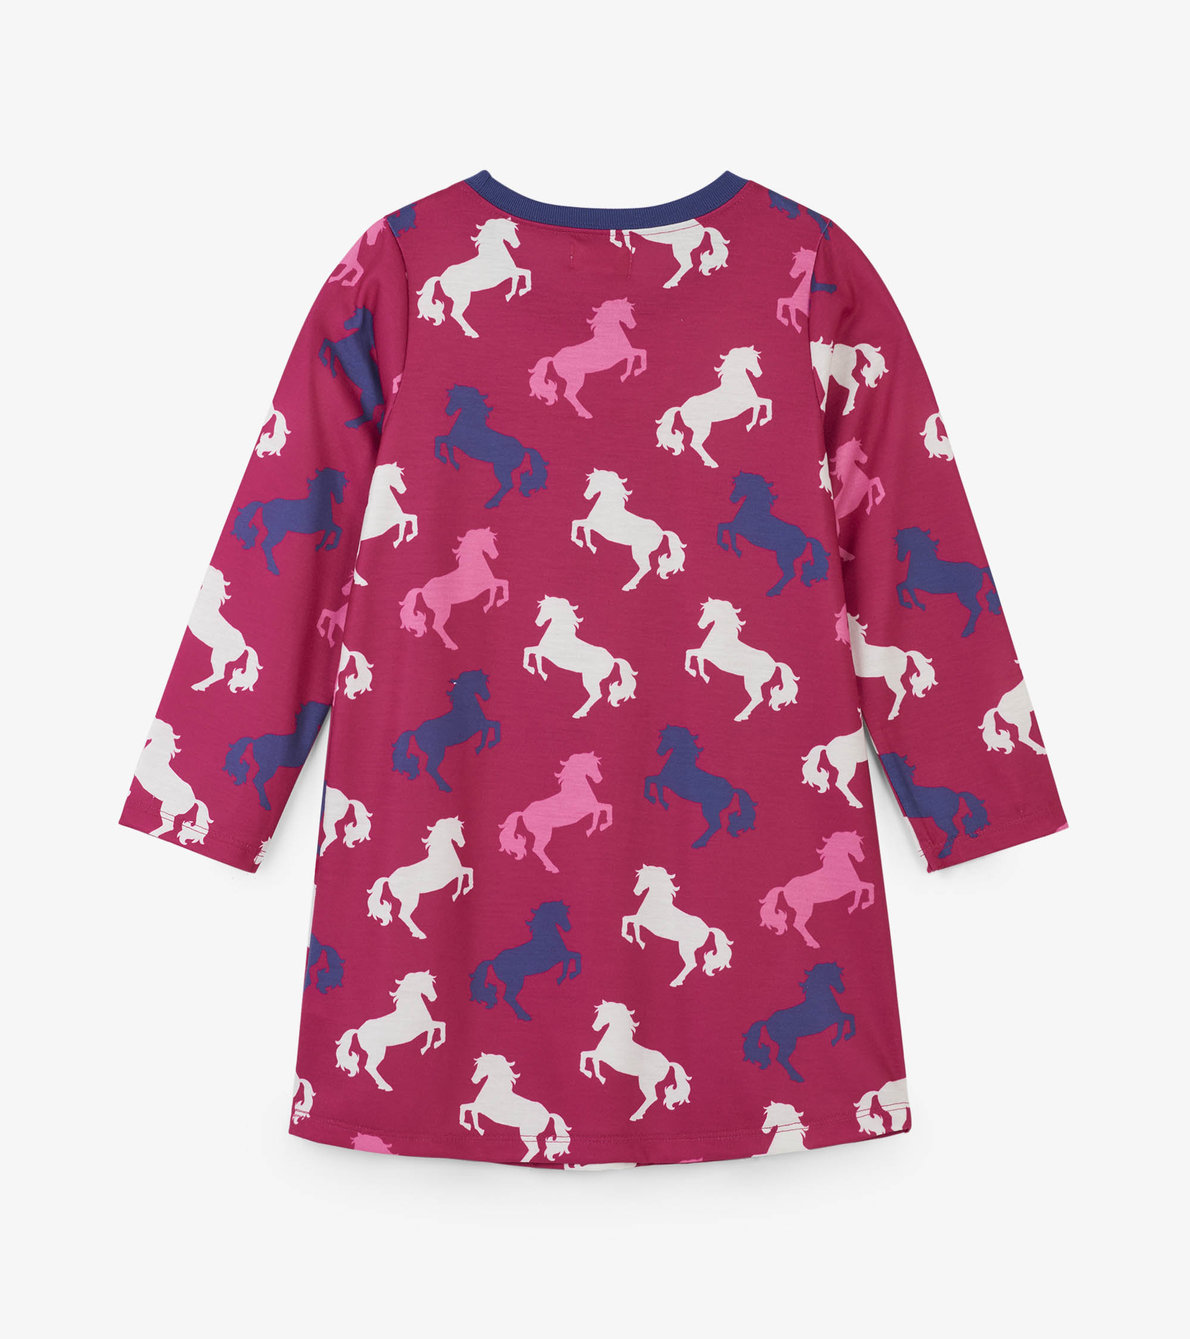 View larger image of Playful Horses Nightdress